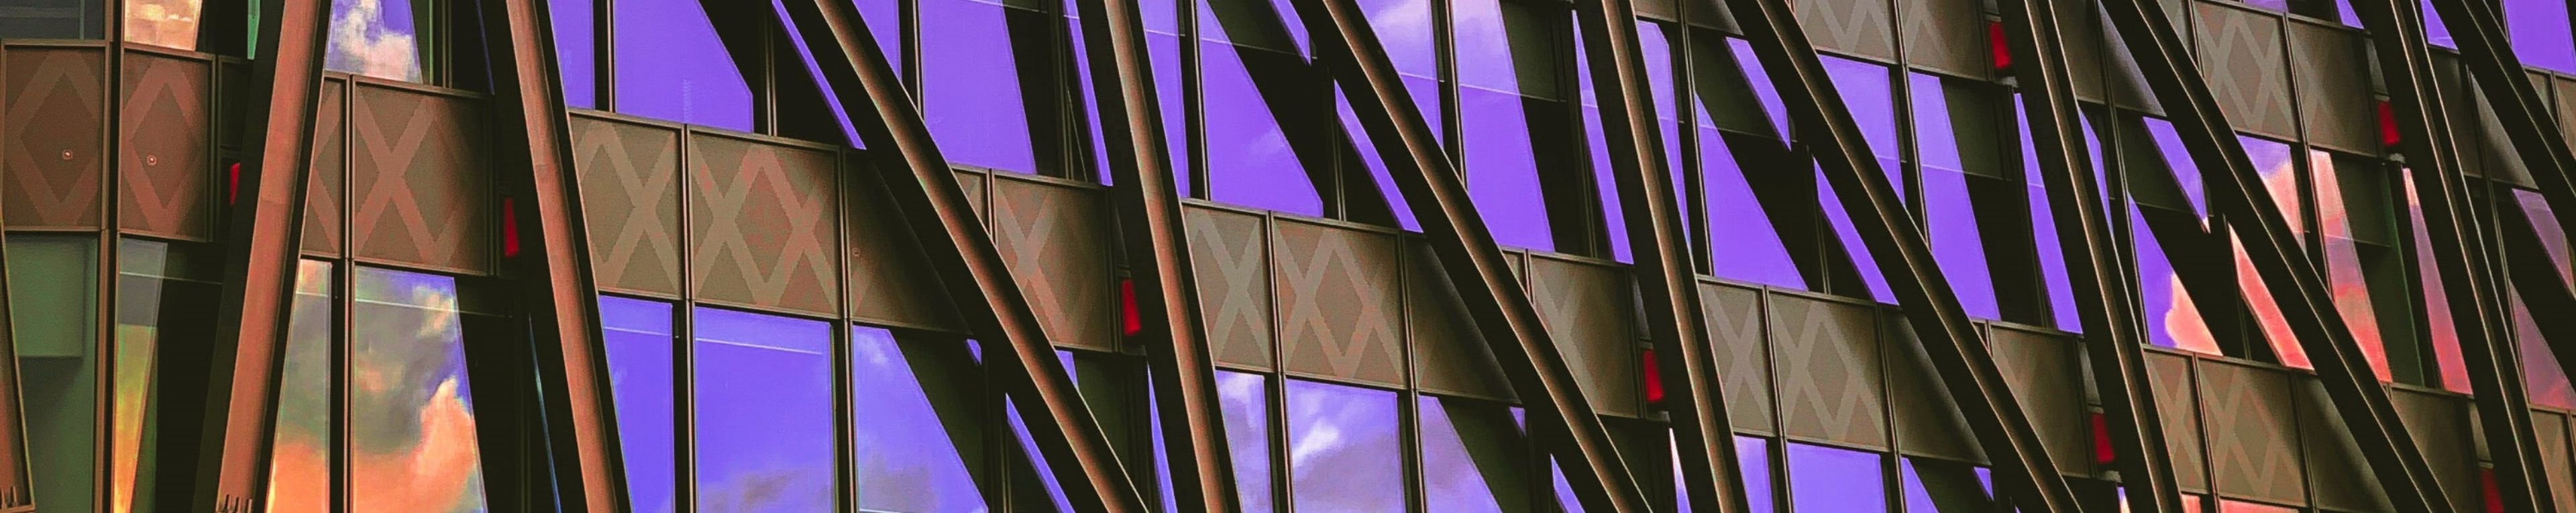 Glass windows of a building reflecting the purple sky and orange clouds.